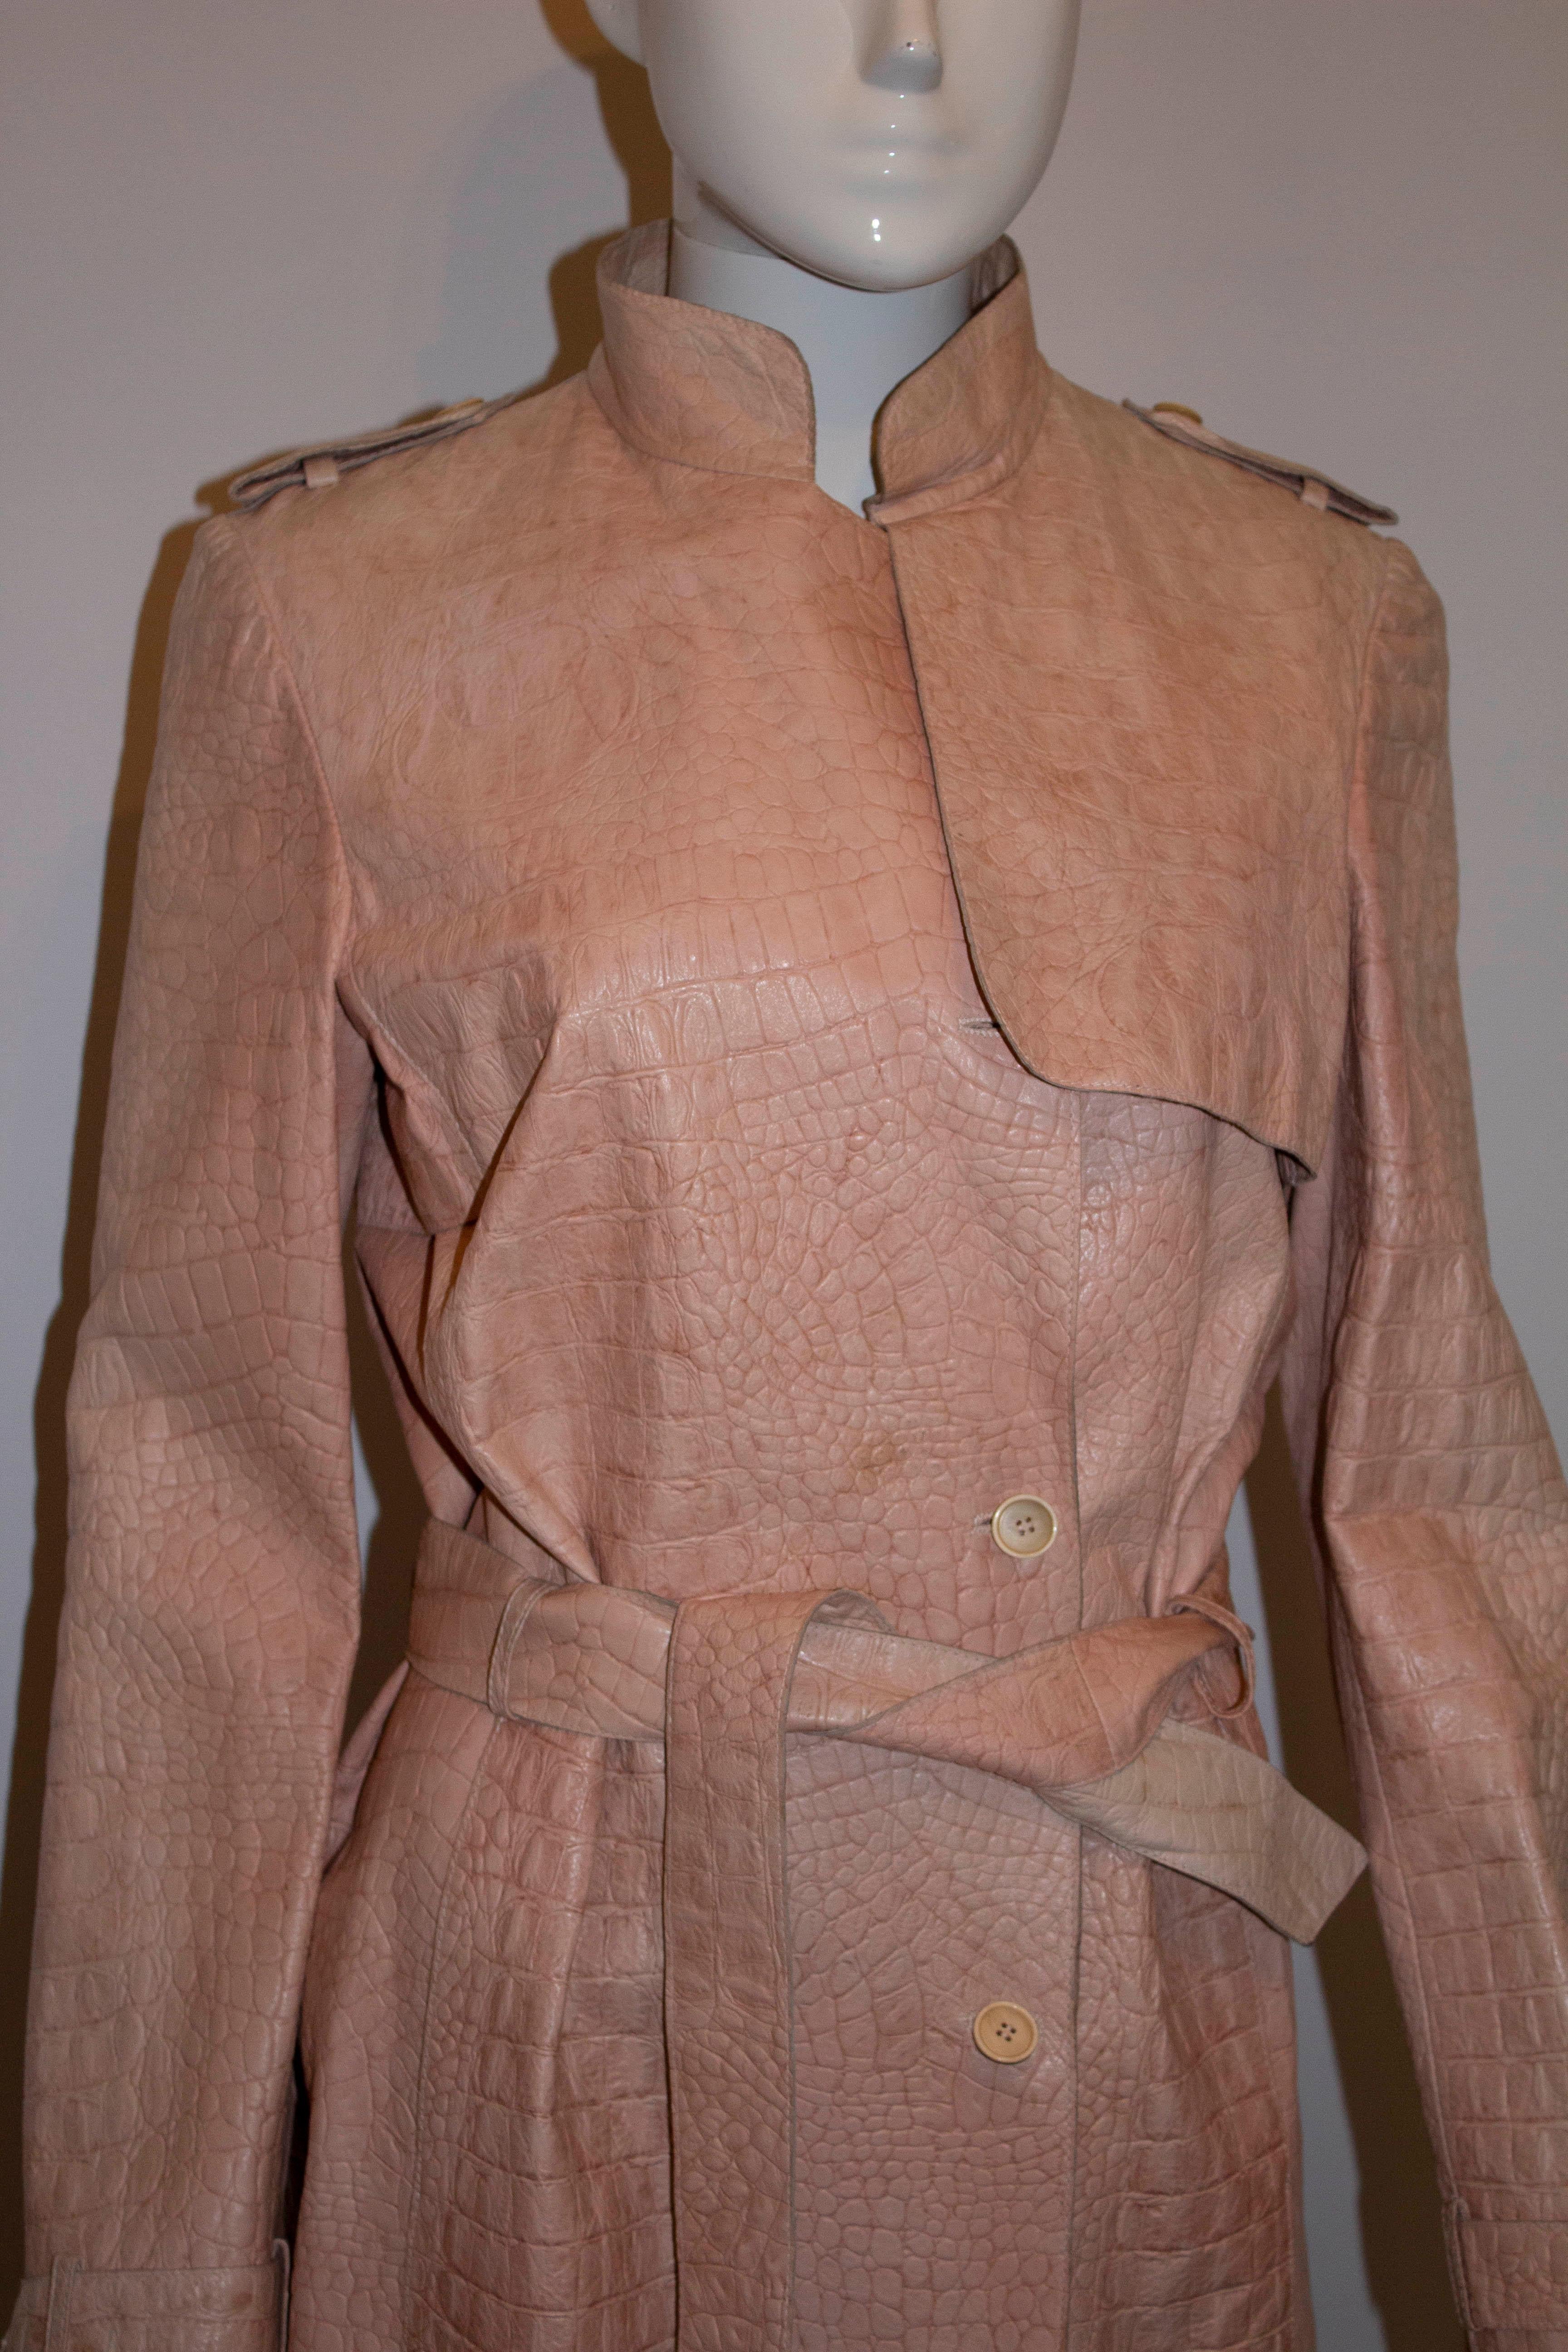 A chic leather trench coat for Spring / Summer by Pollini.  In a pretty pink stamped leather, crocodile effect, the coat is fully lined with a leather belt.  Measurements: Bust 36'', waist 29'', length